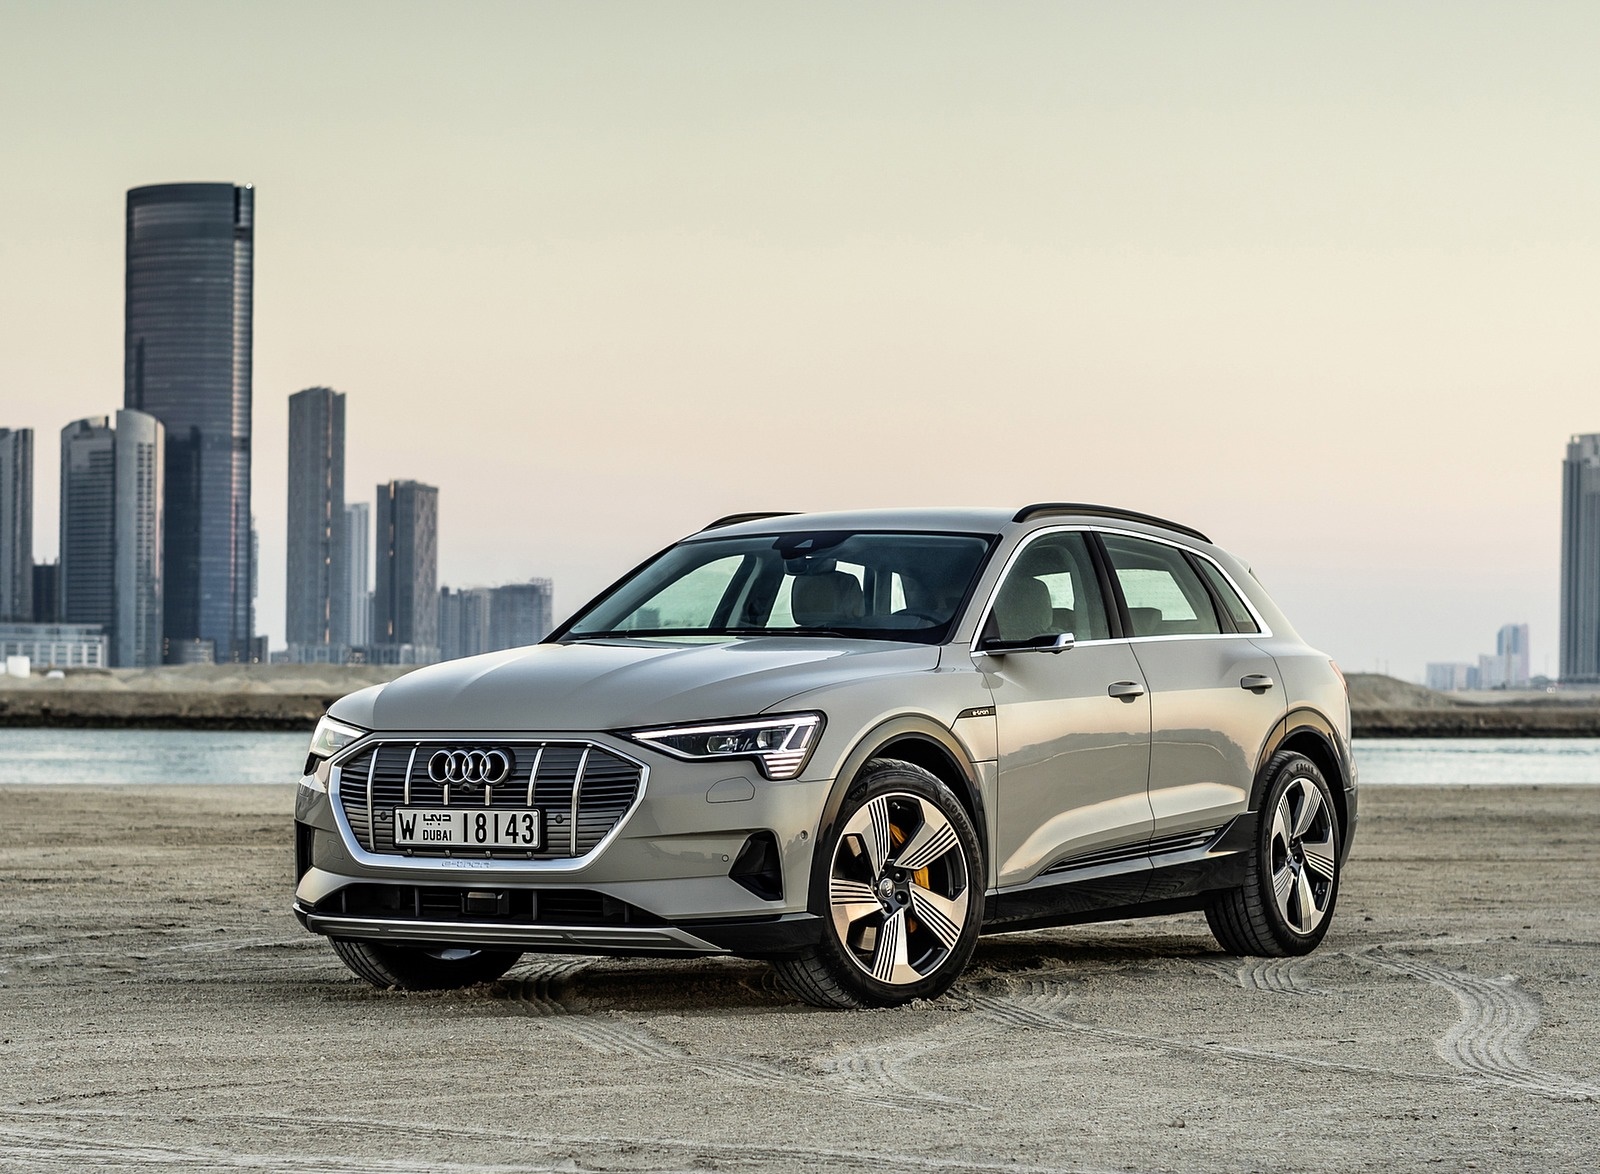 2019 Audi e-tron (Color: Siam Beige) Front Three-Quarter Wallpapers #166 of 234